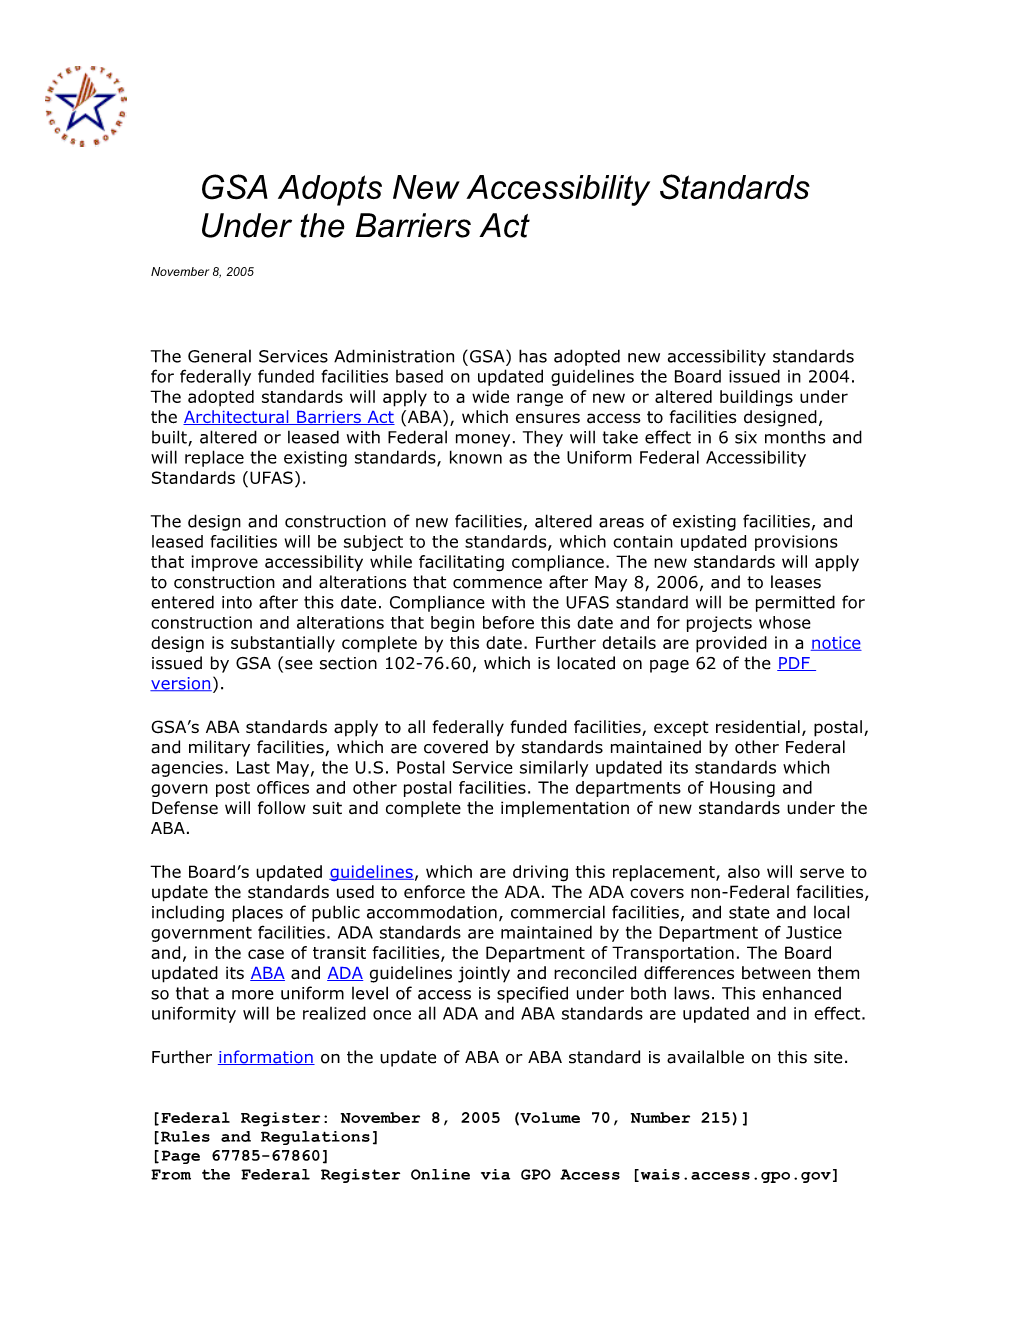 GSA Adopts New Accessibility Standards Under the Barriers Act